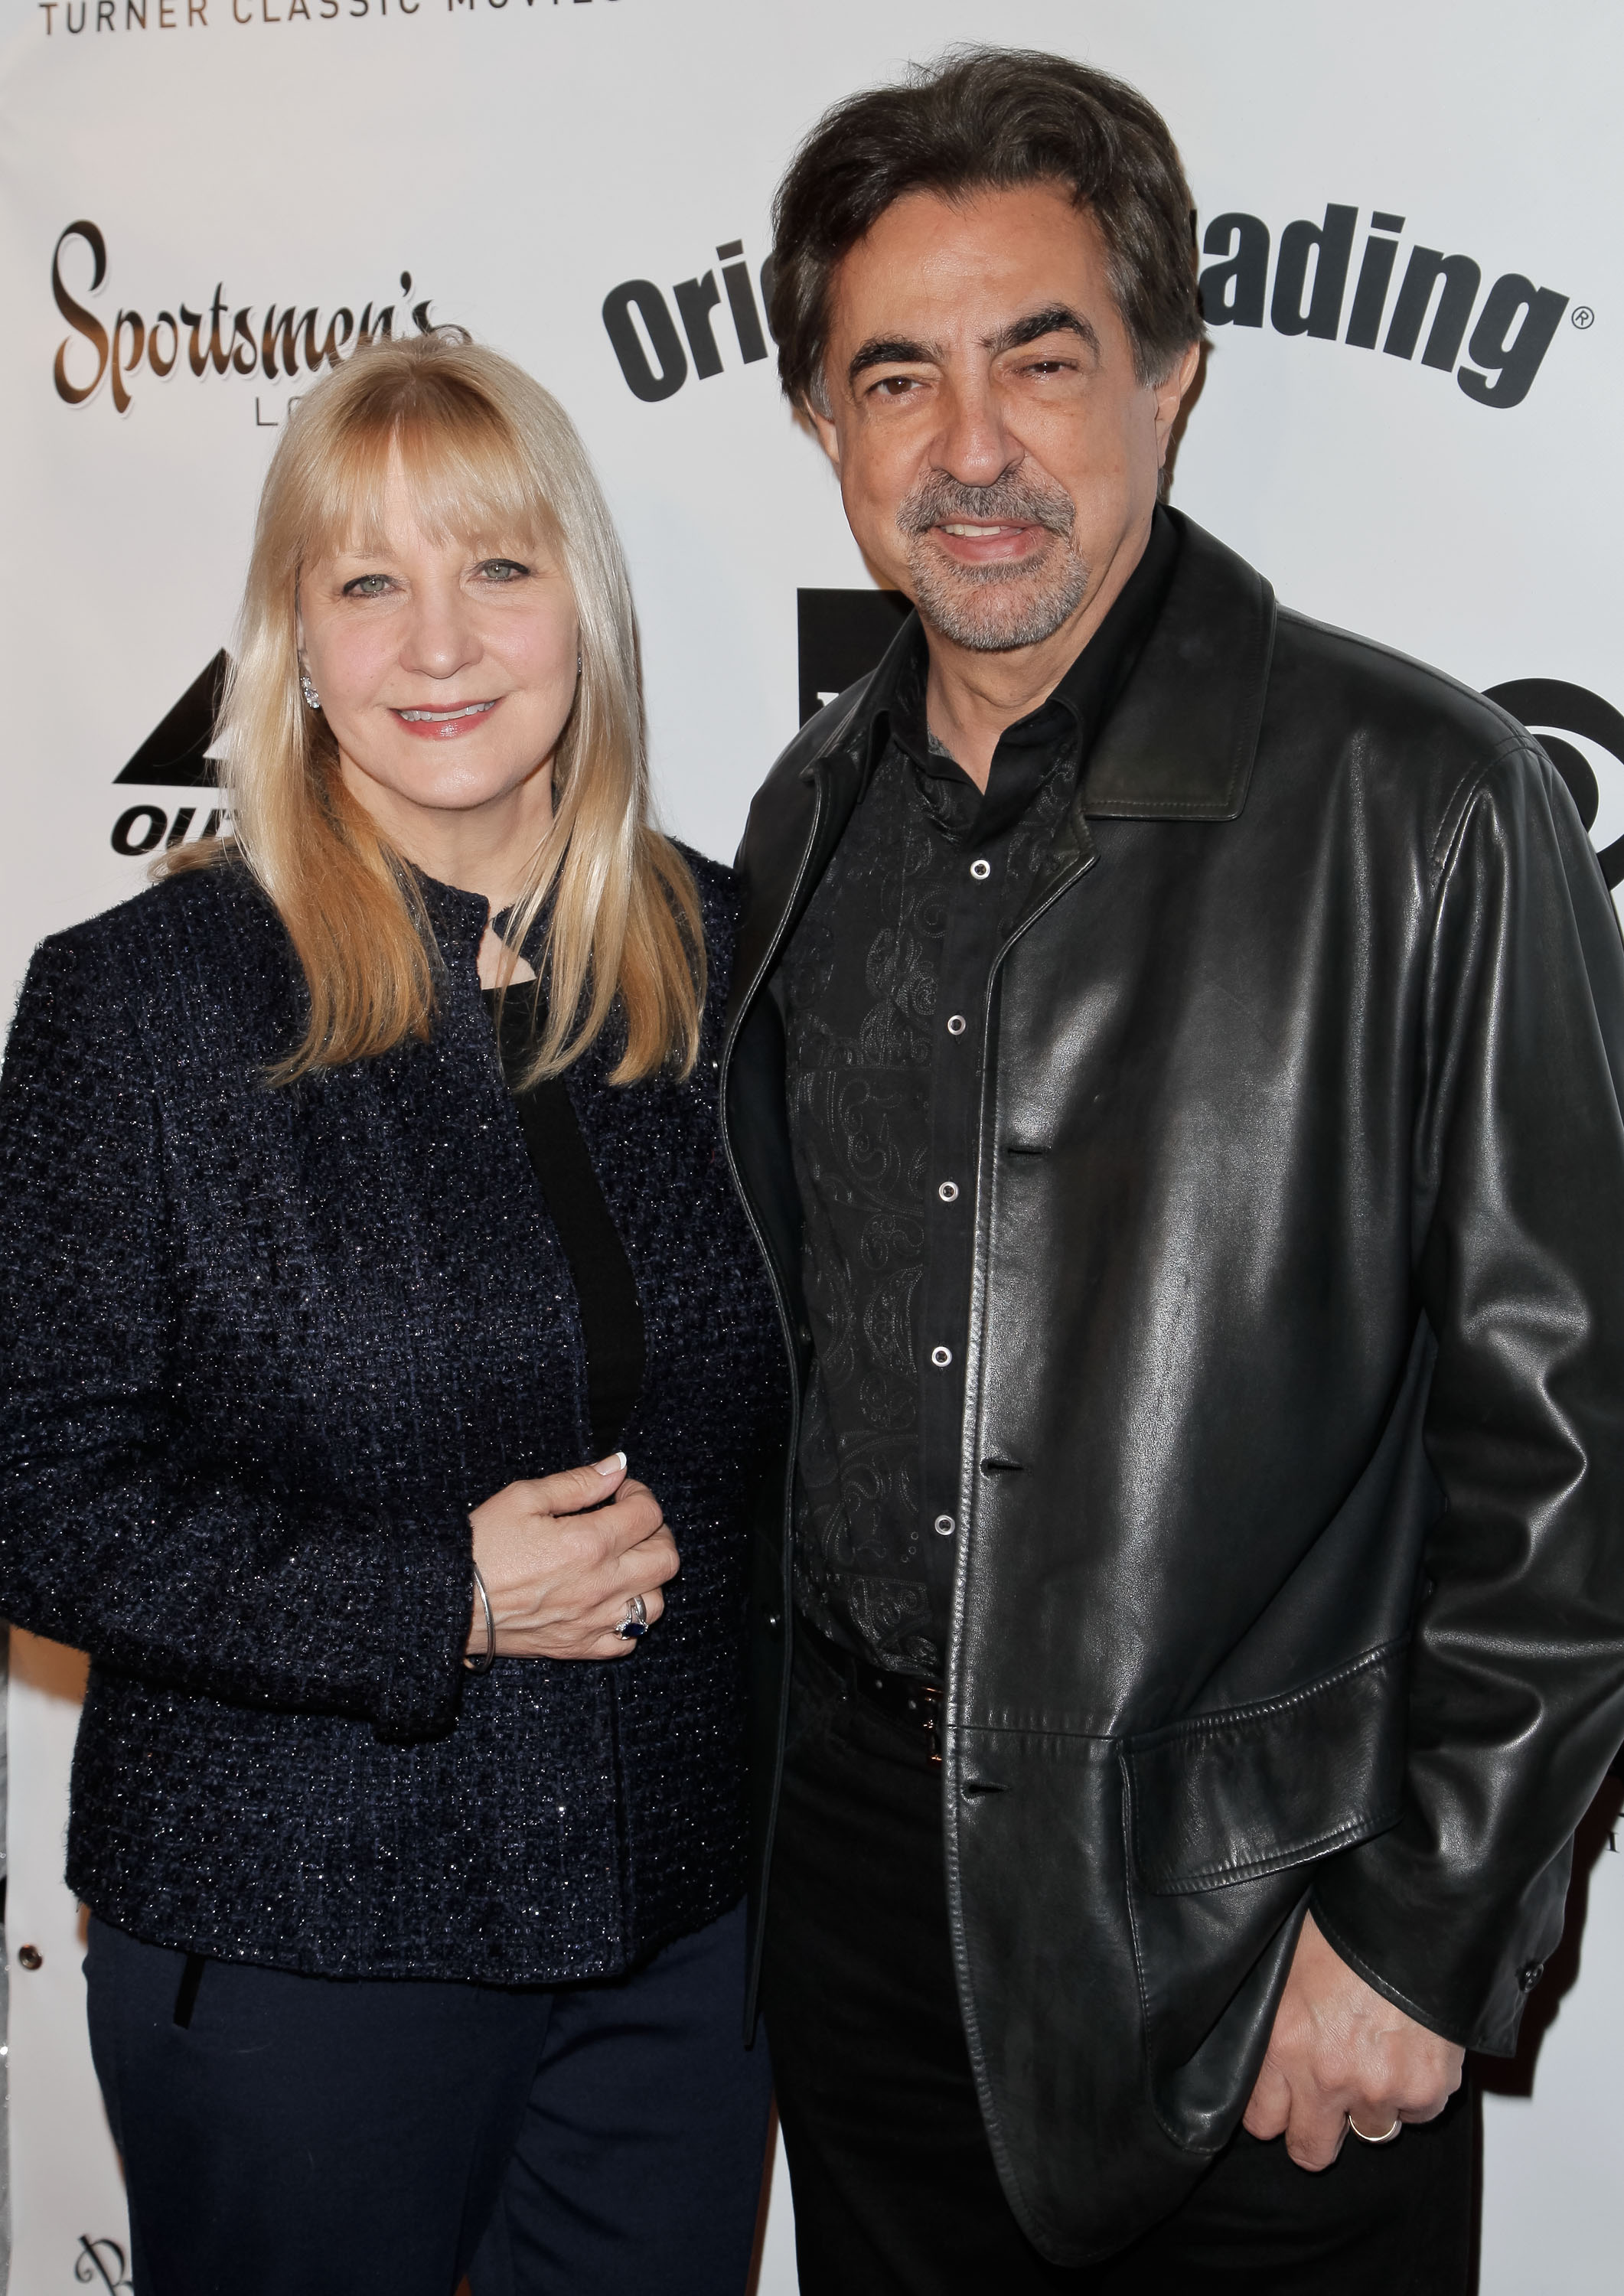 Arlene Vhrel and Joe Mantegna at the 2nd Annual Borgnine Movie Star Gala in Studio City, California on February 1, 2014 | Source: Getty Images